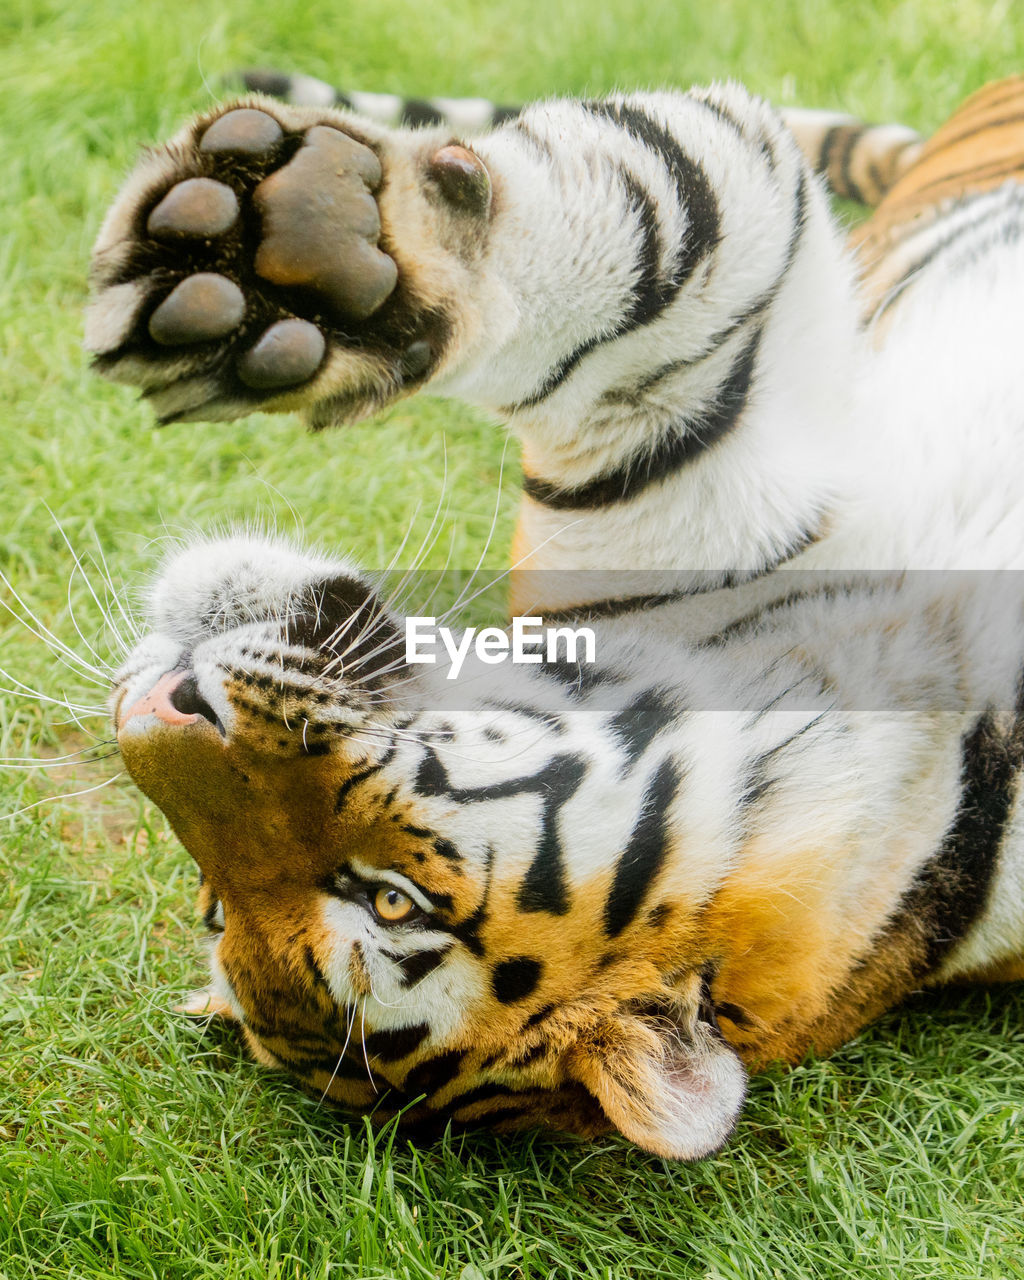 Close-up of a tiger on grass